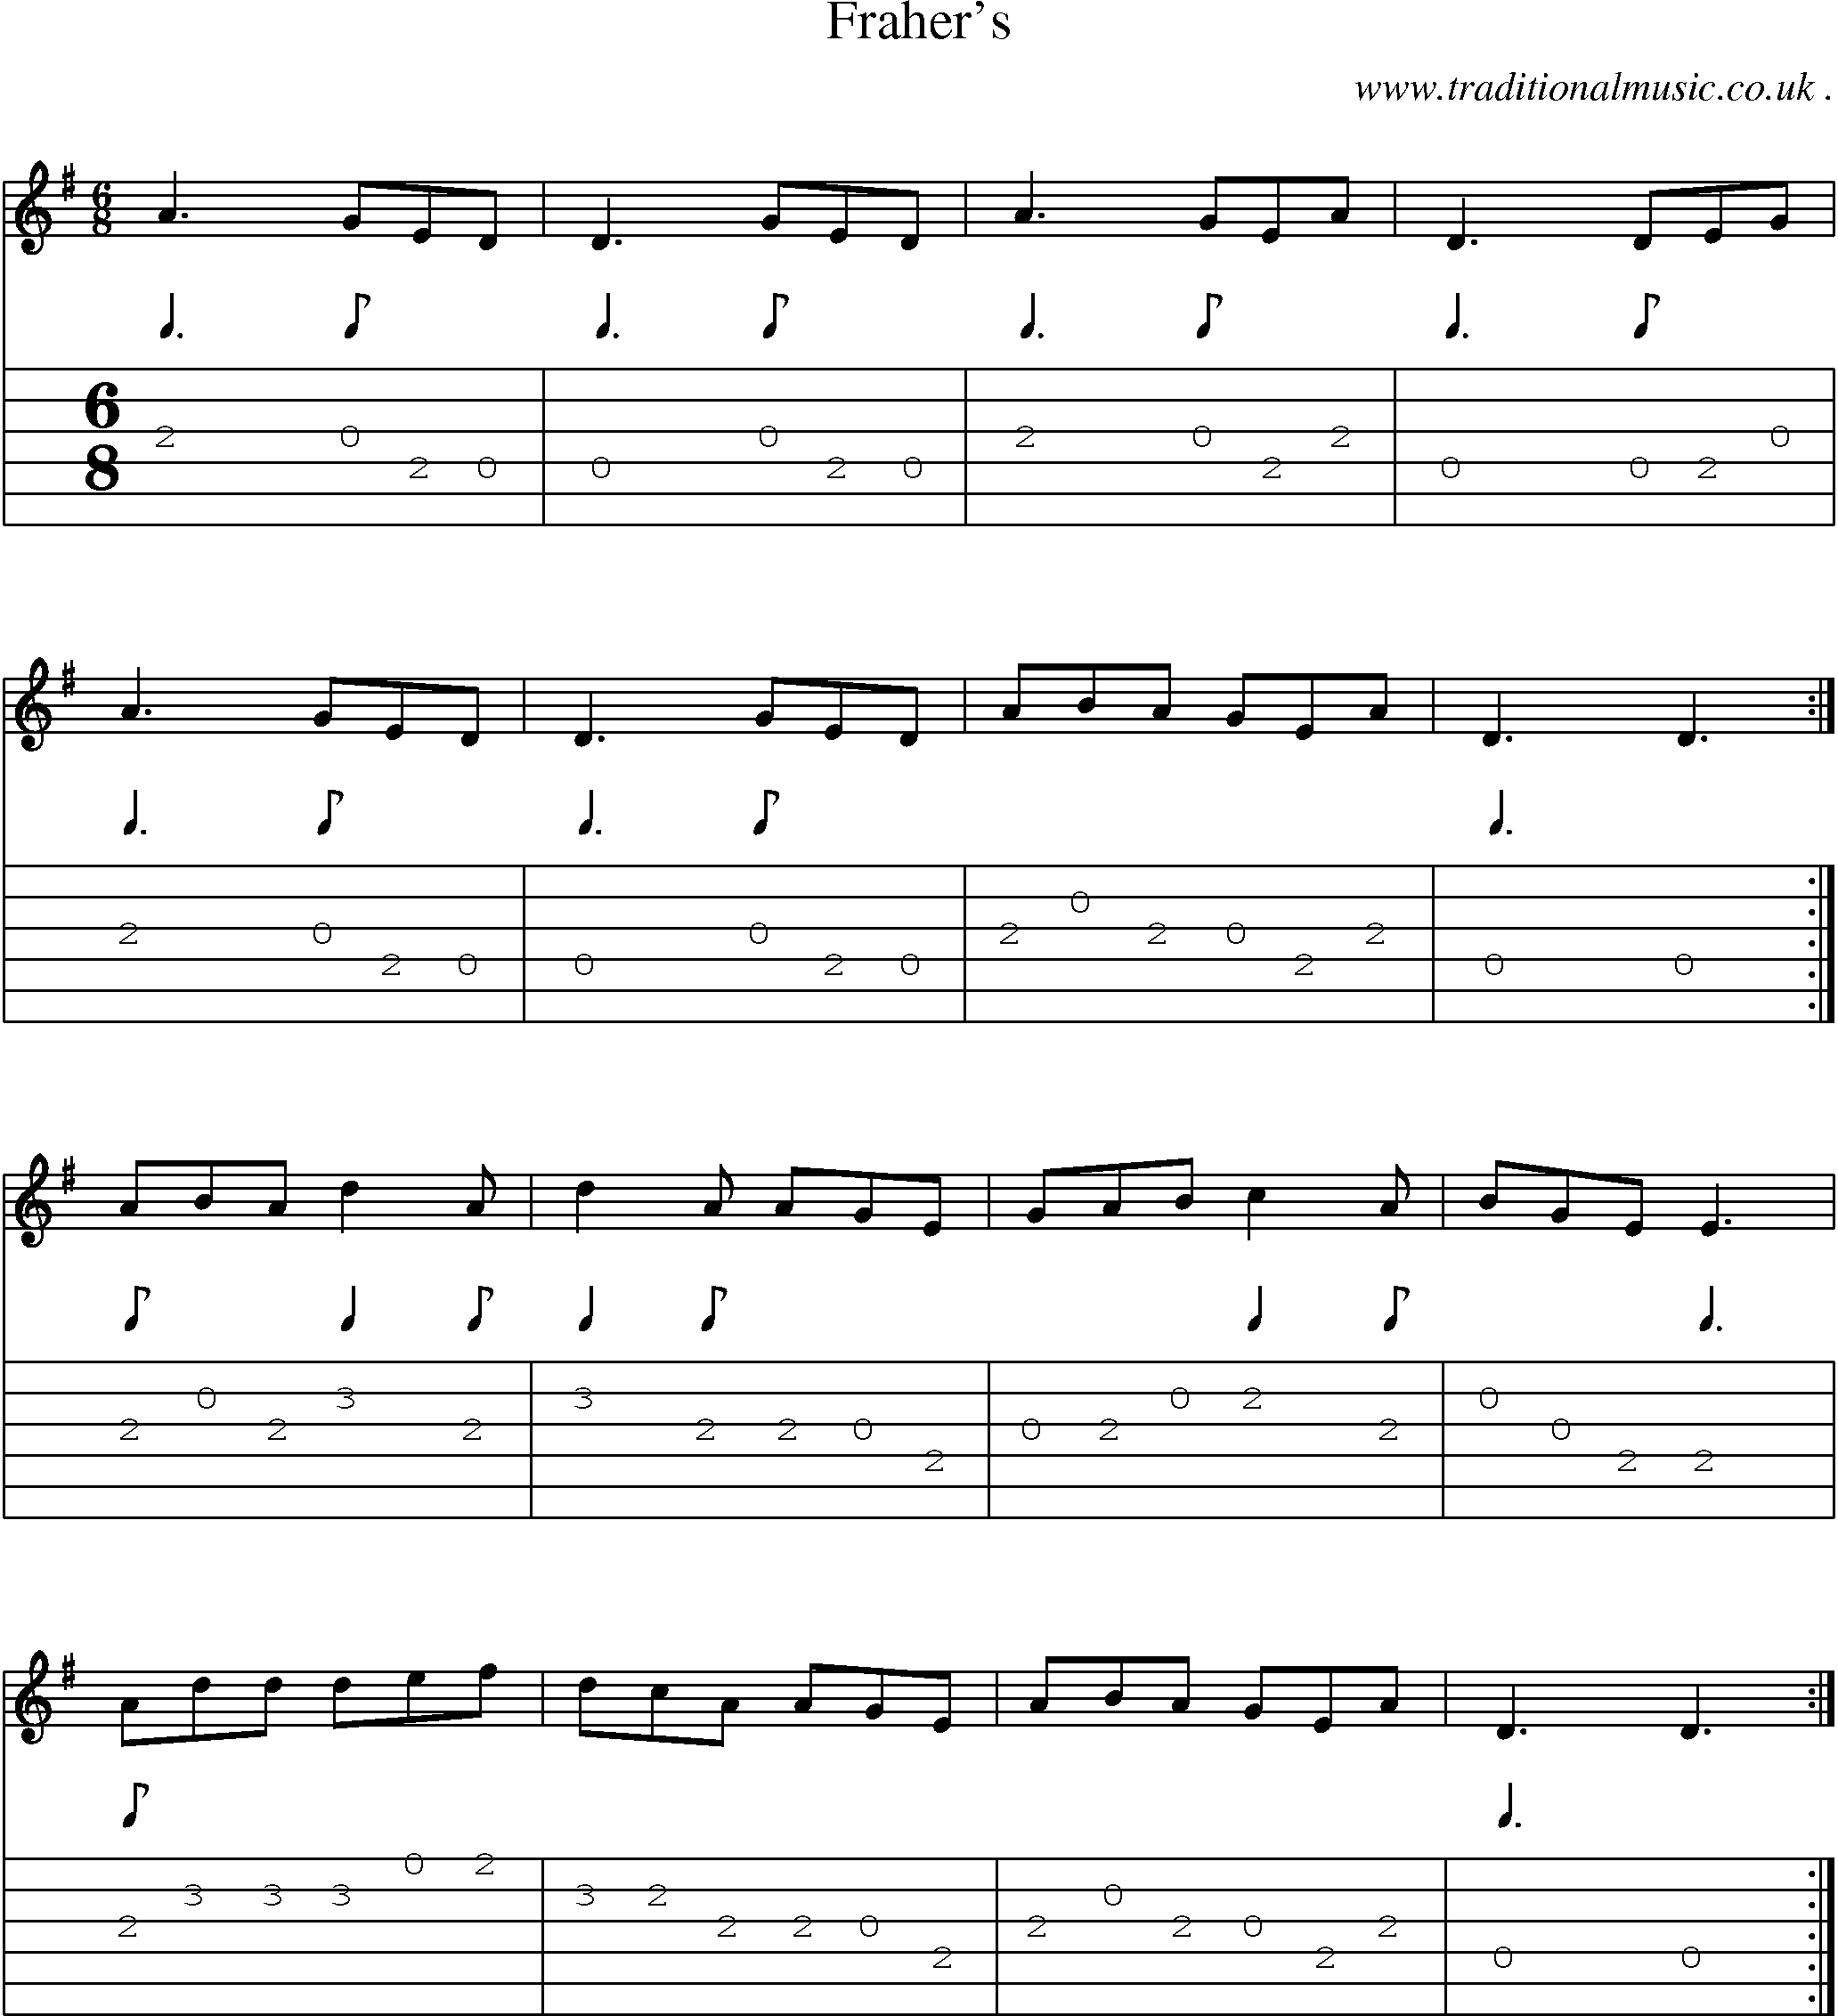 Sheet-Music and Guitar Tabs for Frahers